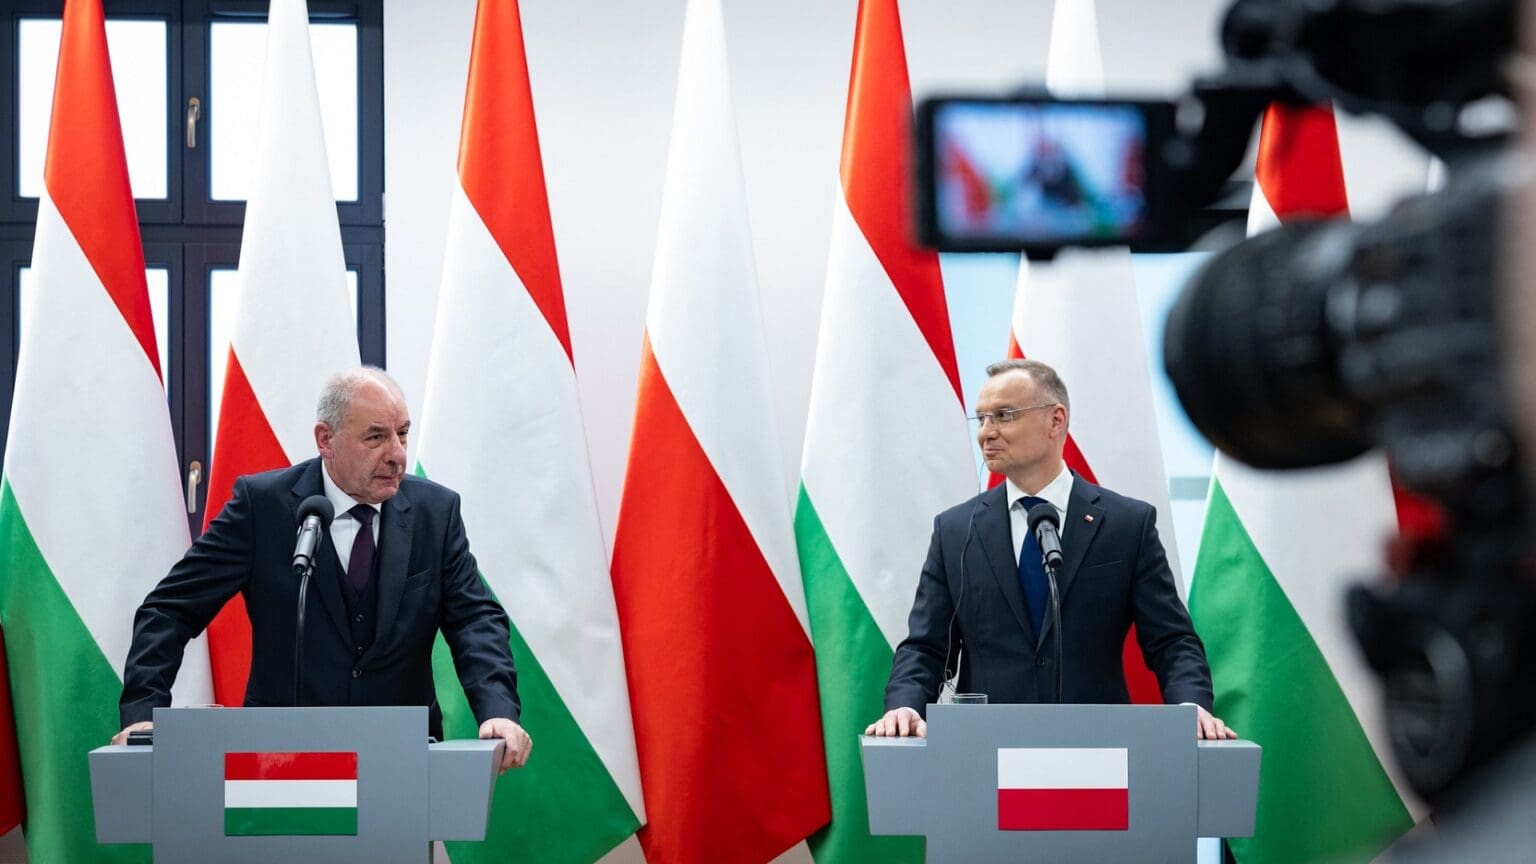 Newly Inaugurated President of Hungary Makes First Diplomatic Visit to Poland